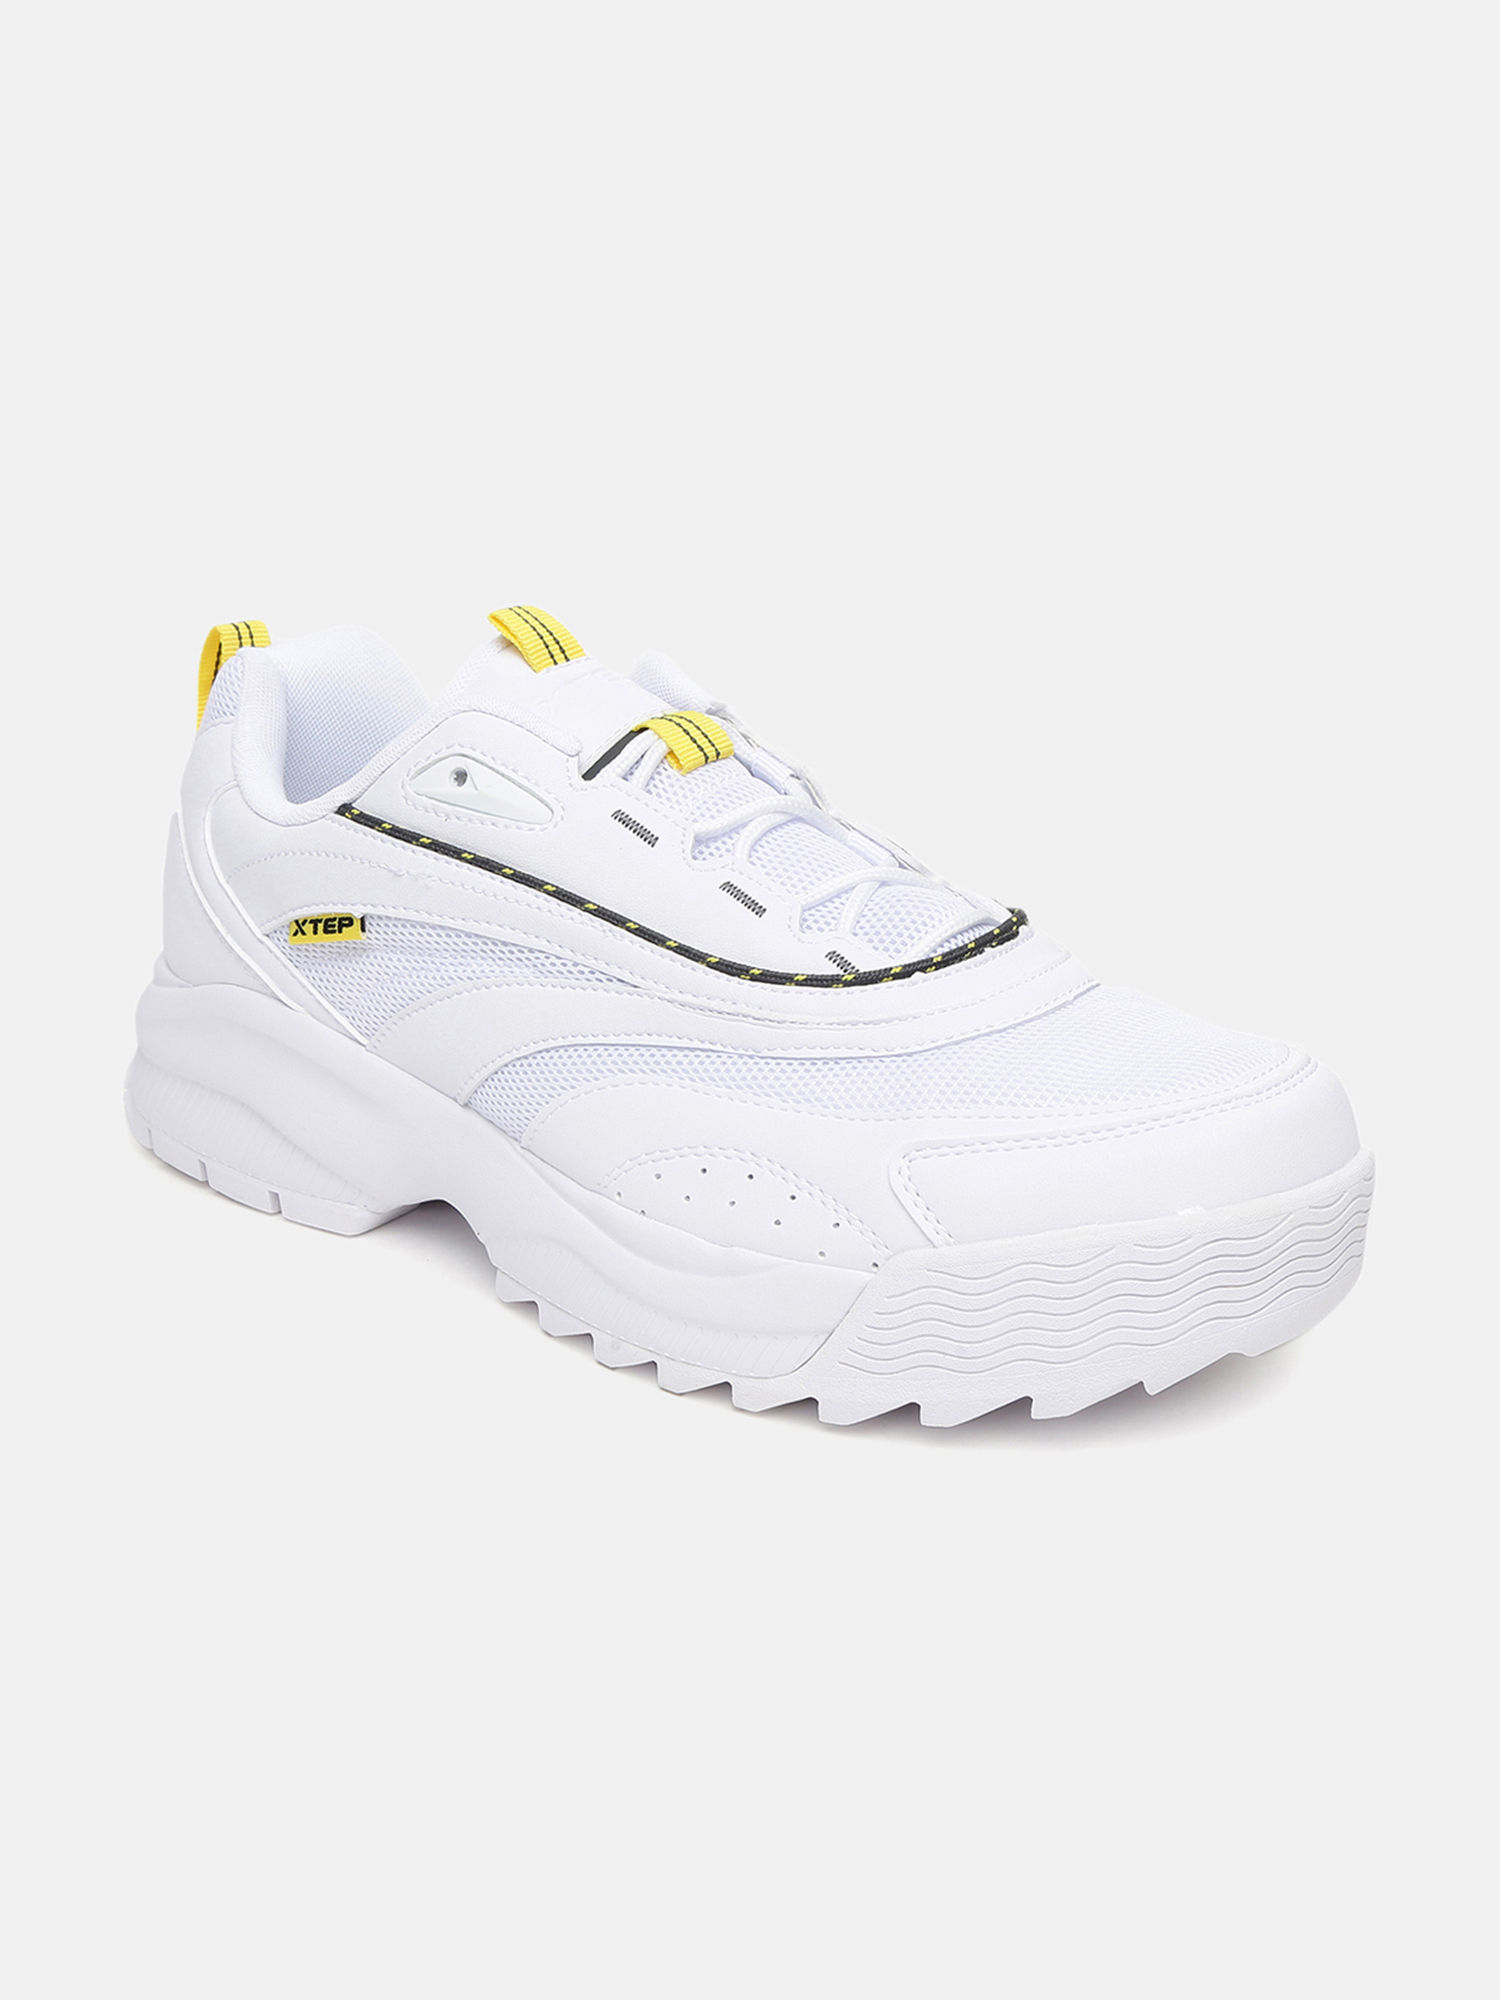 XTEP White Solid Sneakers - EURO 42: Buy XTEP White Solid Sneakers ...